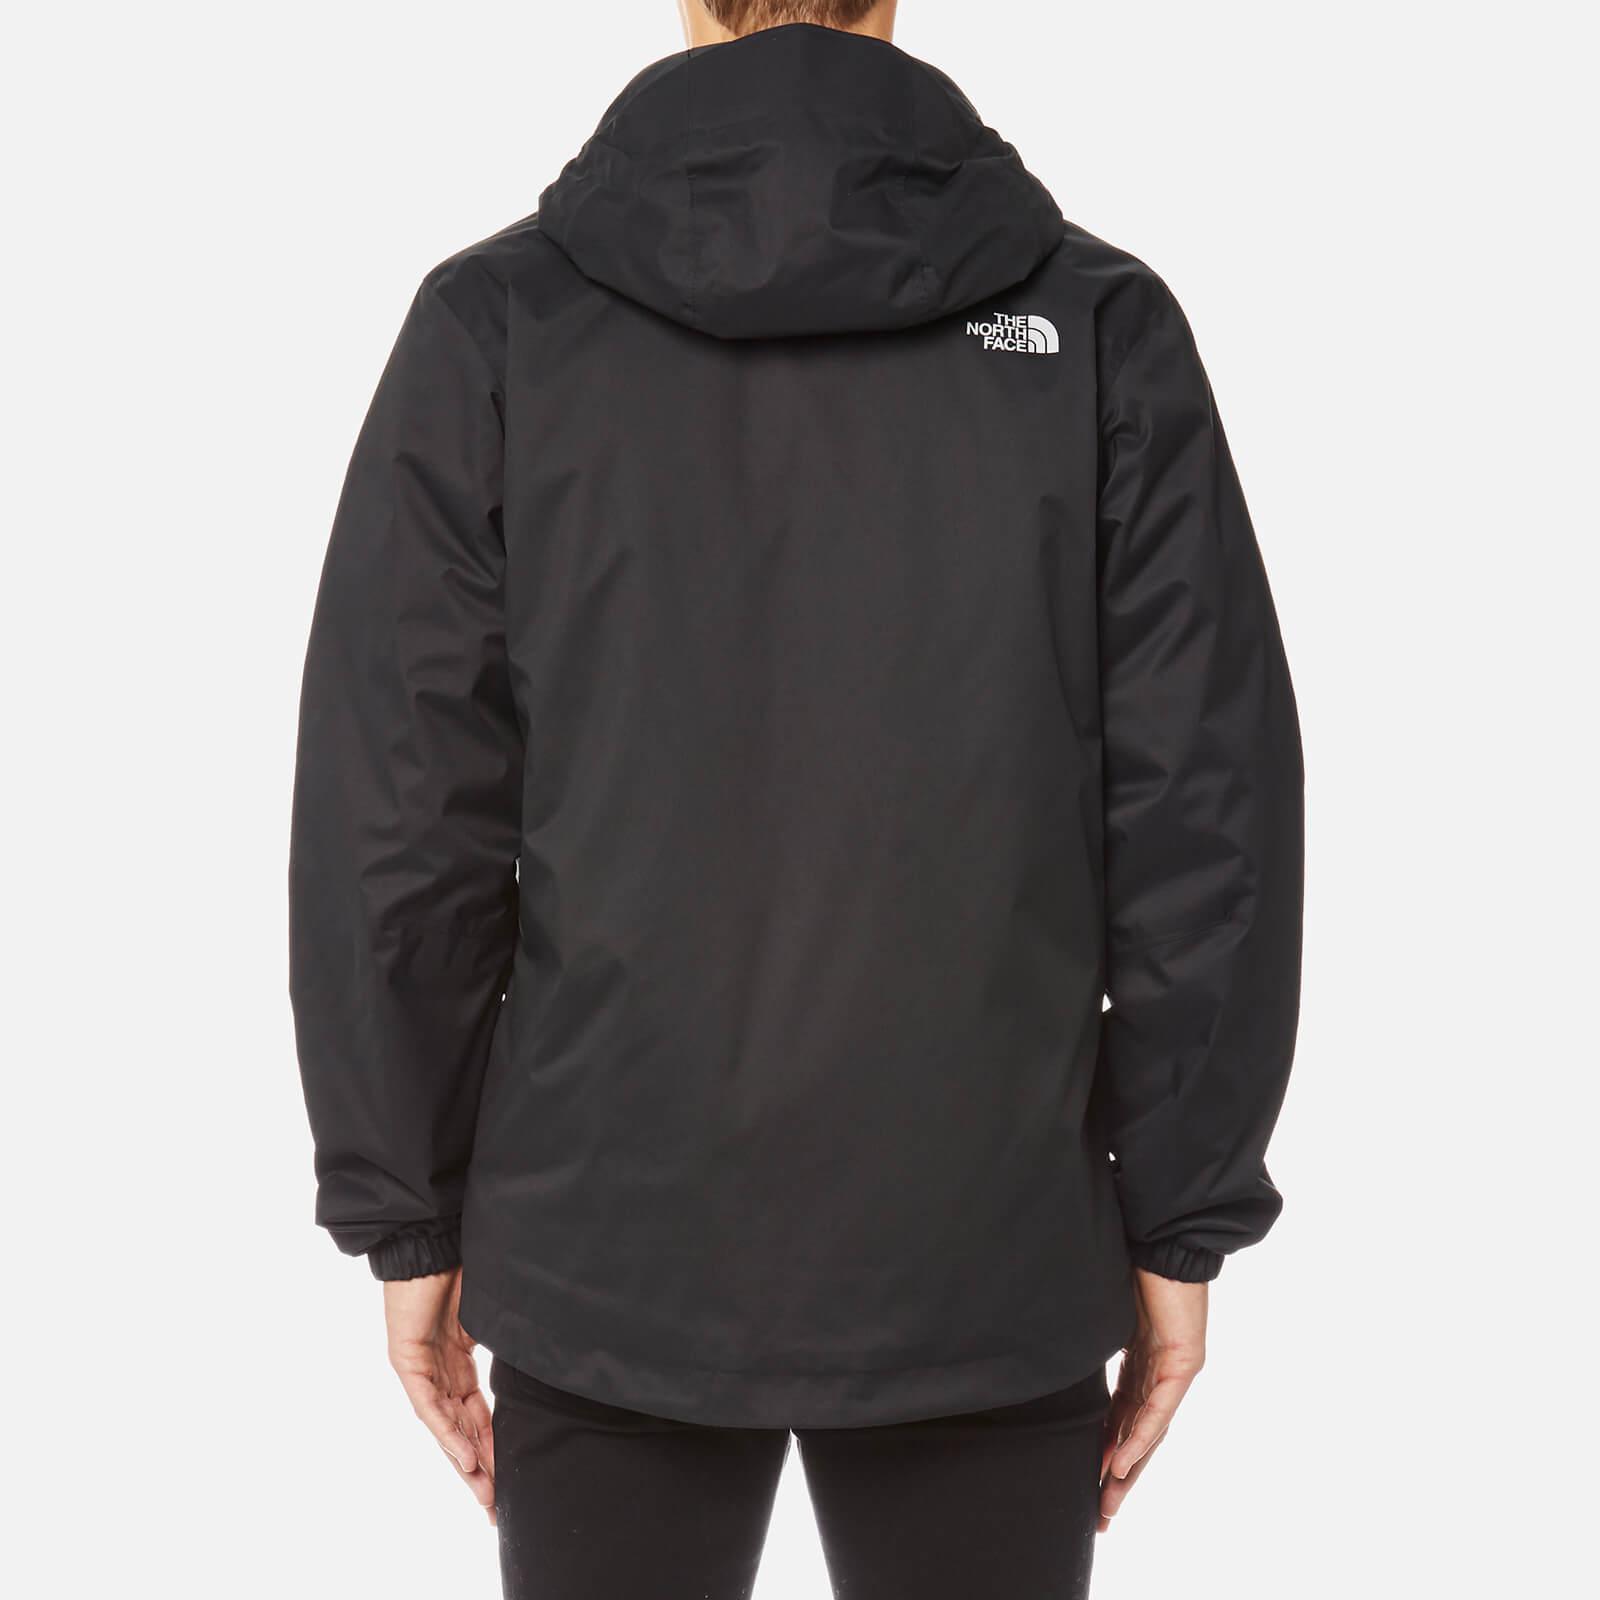 The North Face Synthetic Quest Insulated Jacket in Black for Men - Lyst